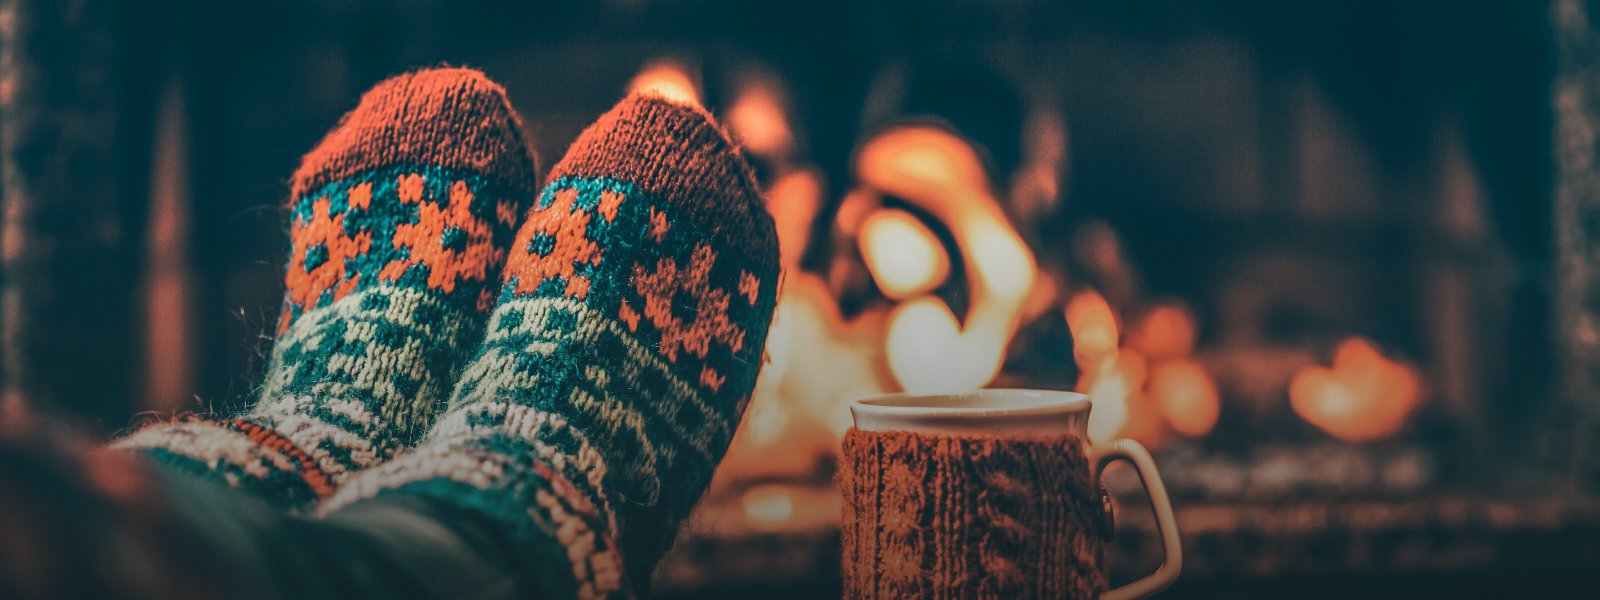 How-to-reach-tech-support-holidays-2023-banner-Image showing cozy socks by a fire